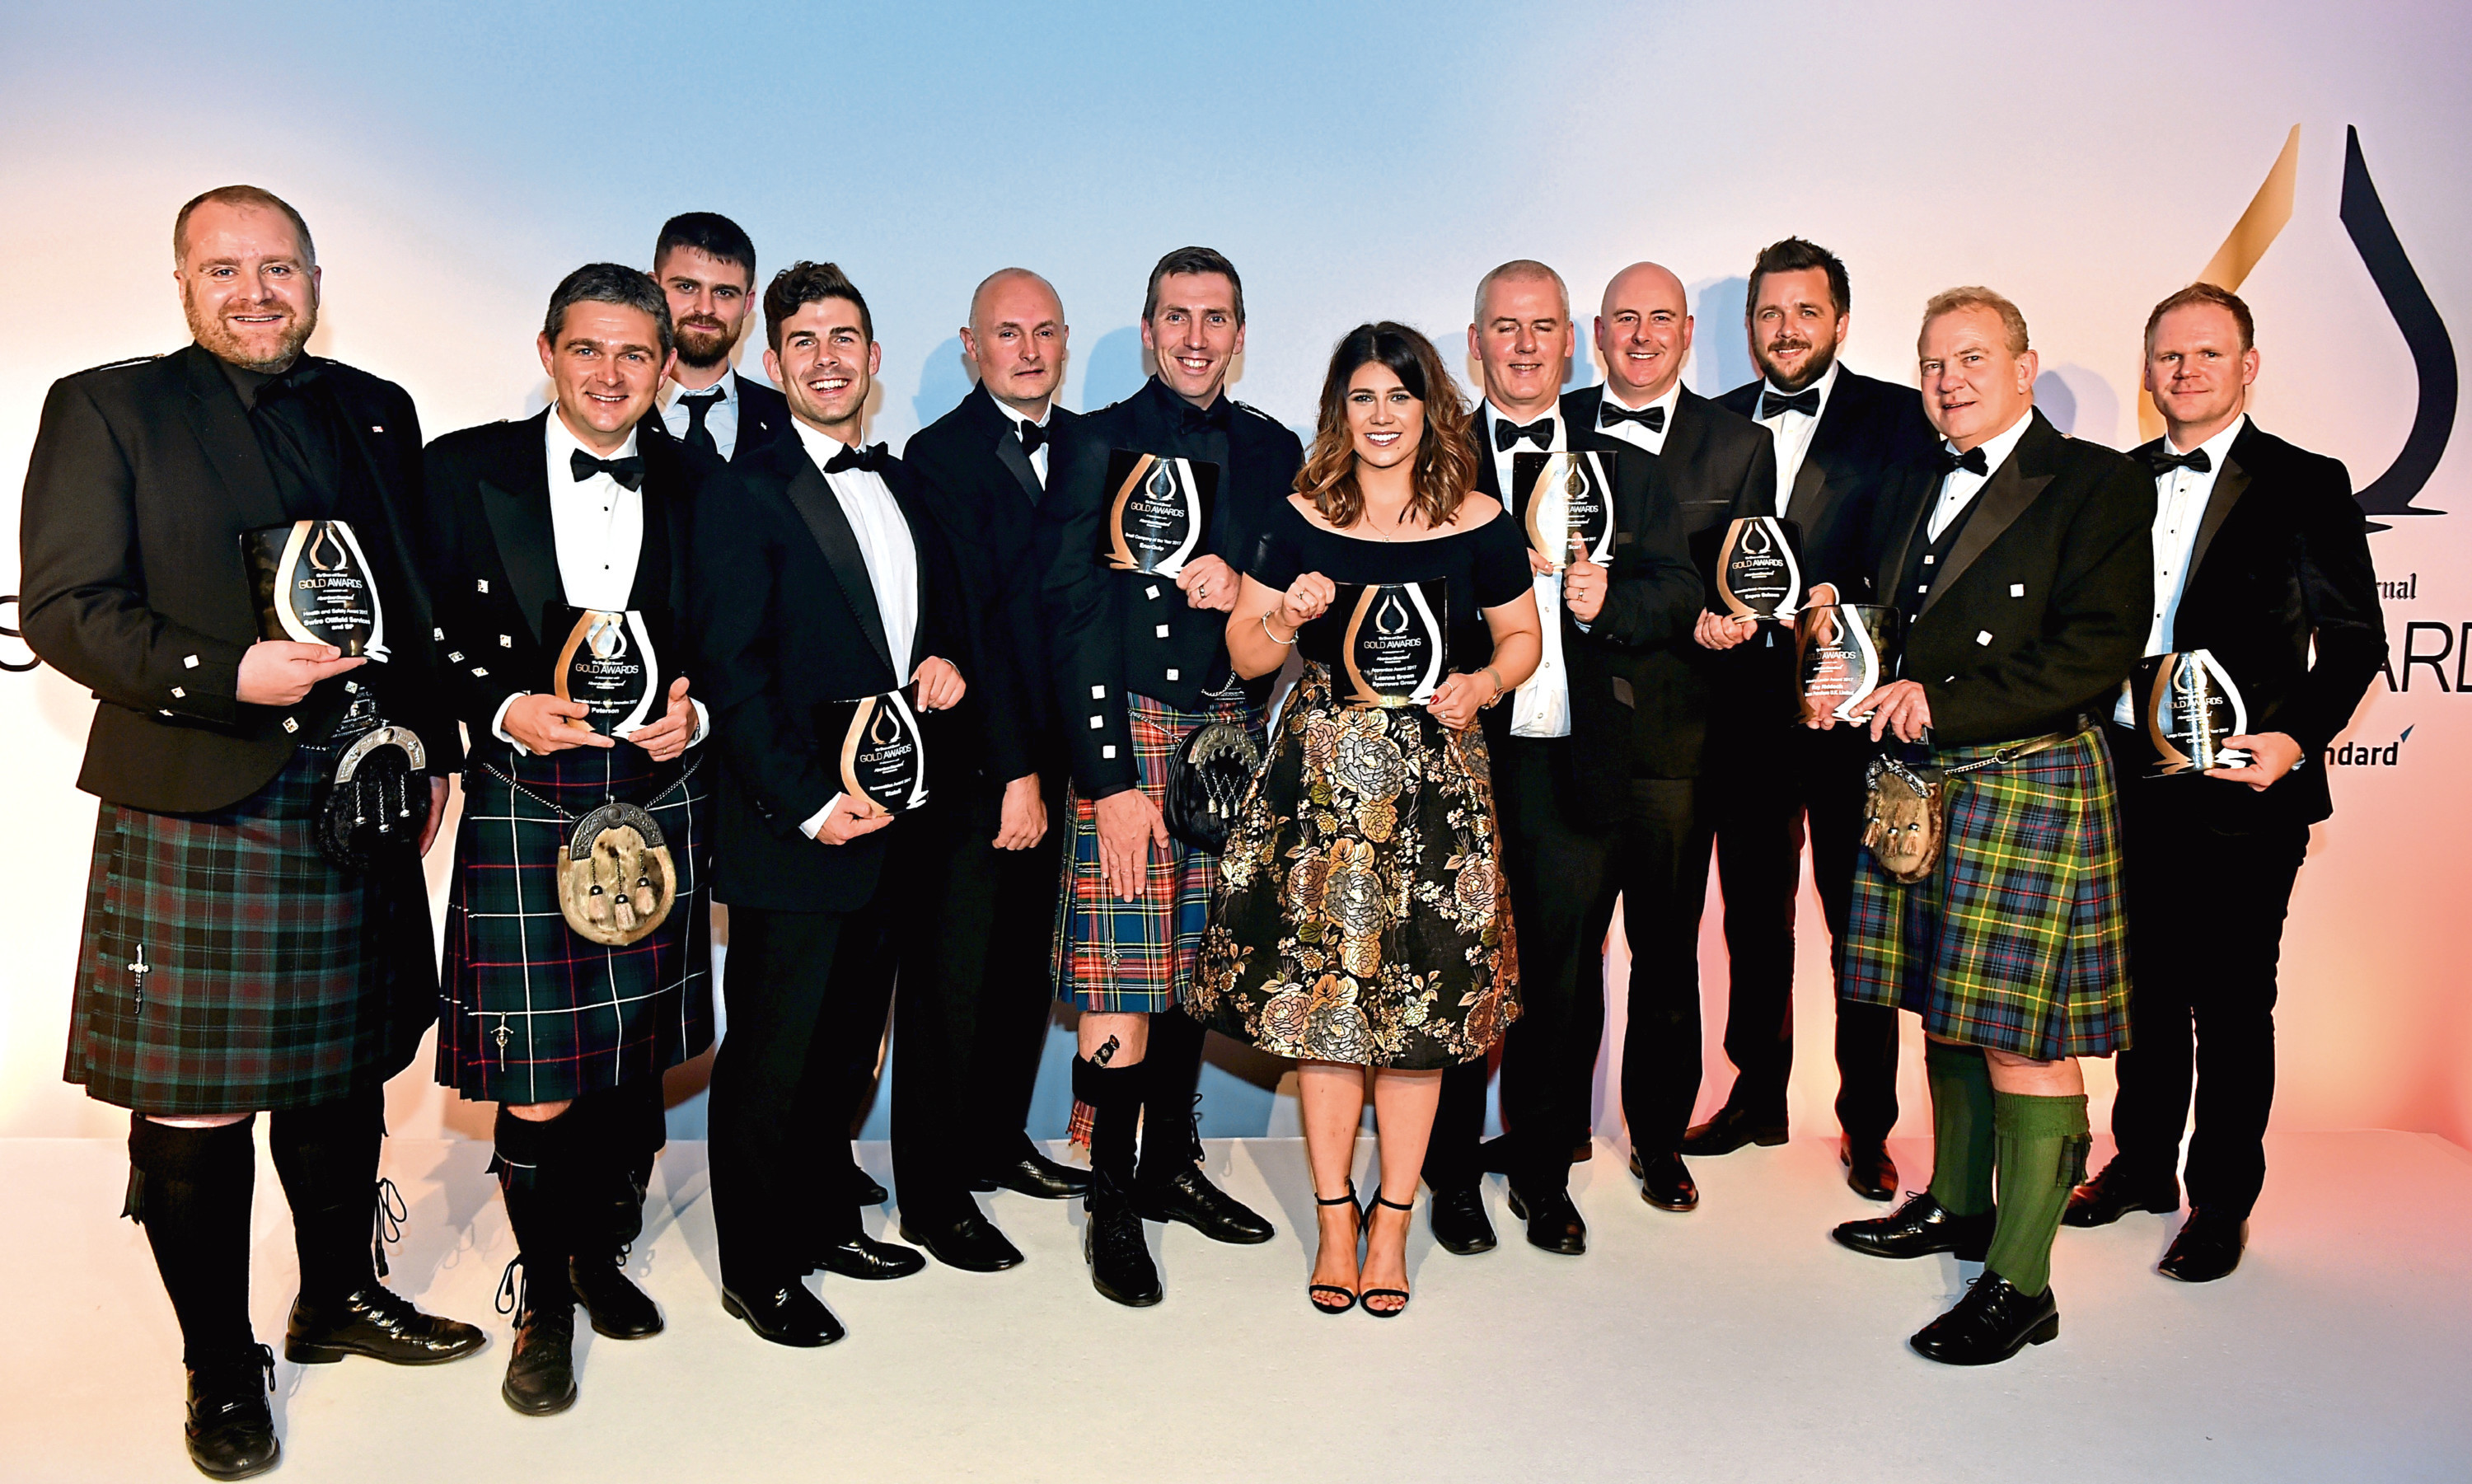 The winners with their trophies from last year’s Press and Journal Gold Awards which recognise talent from across the oil and gas industry